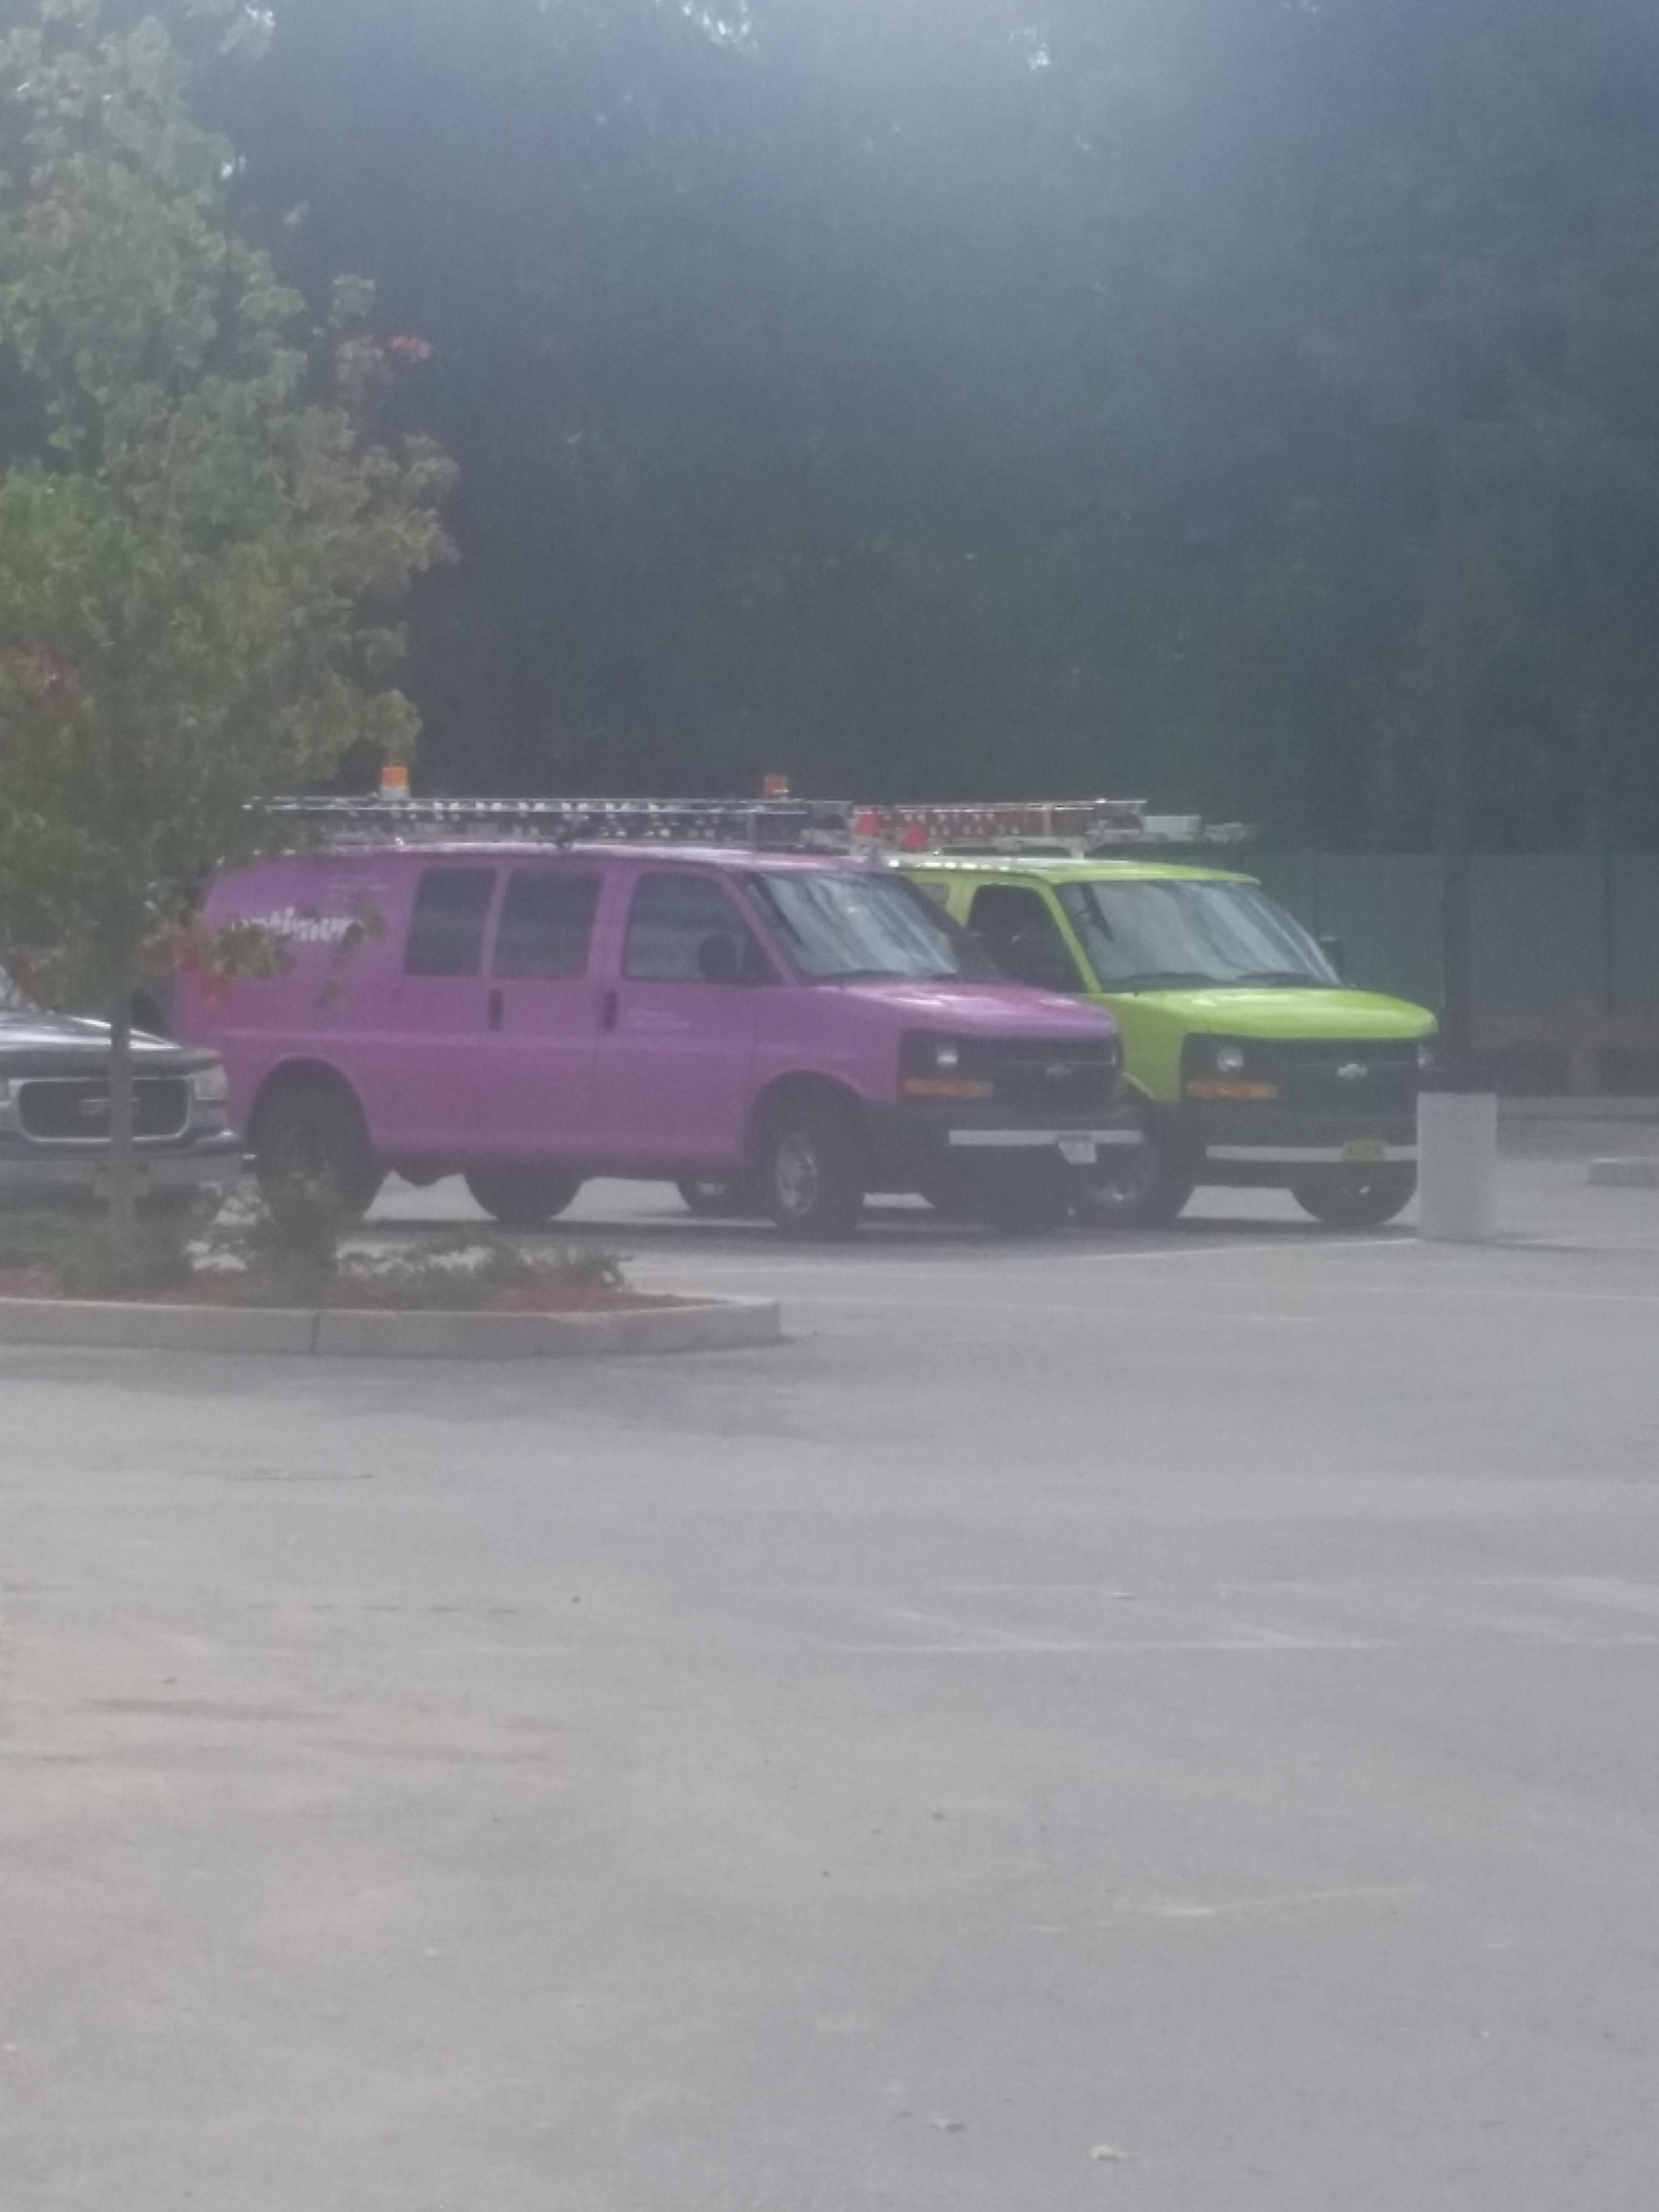 Cosmo and Wanda aint fooling no one